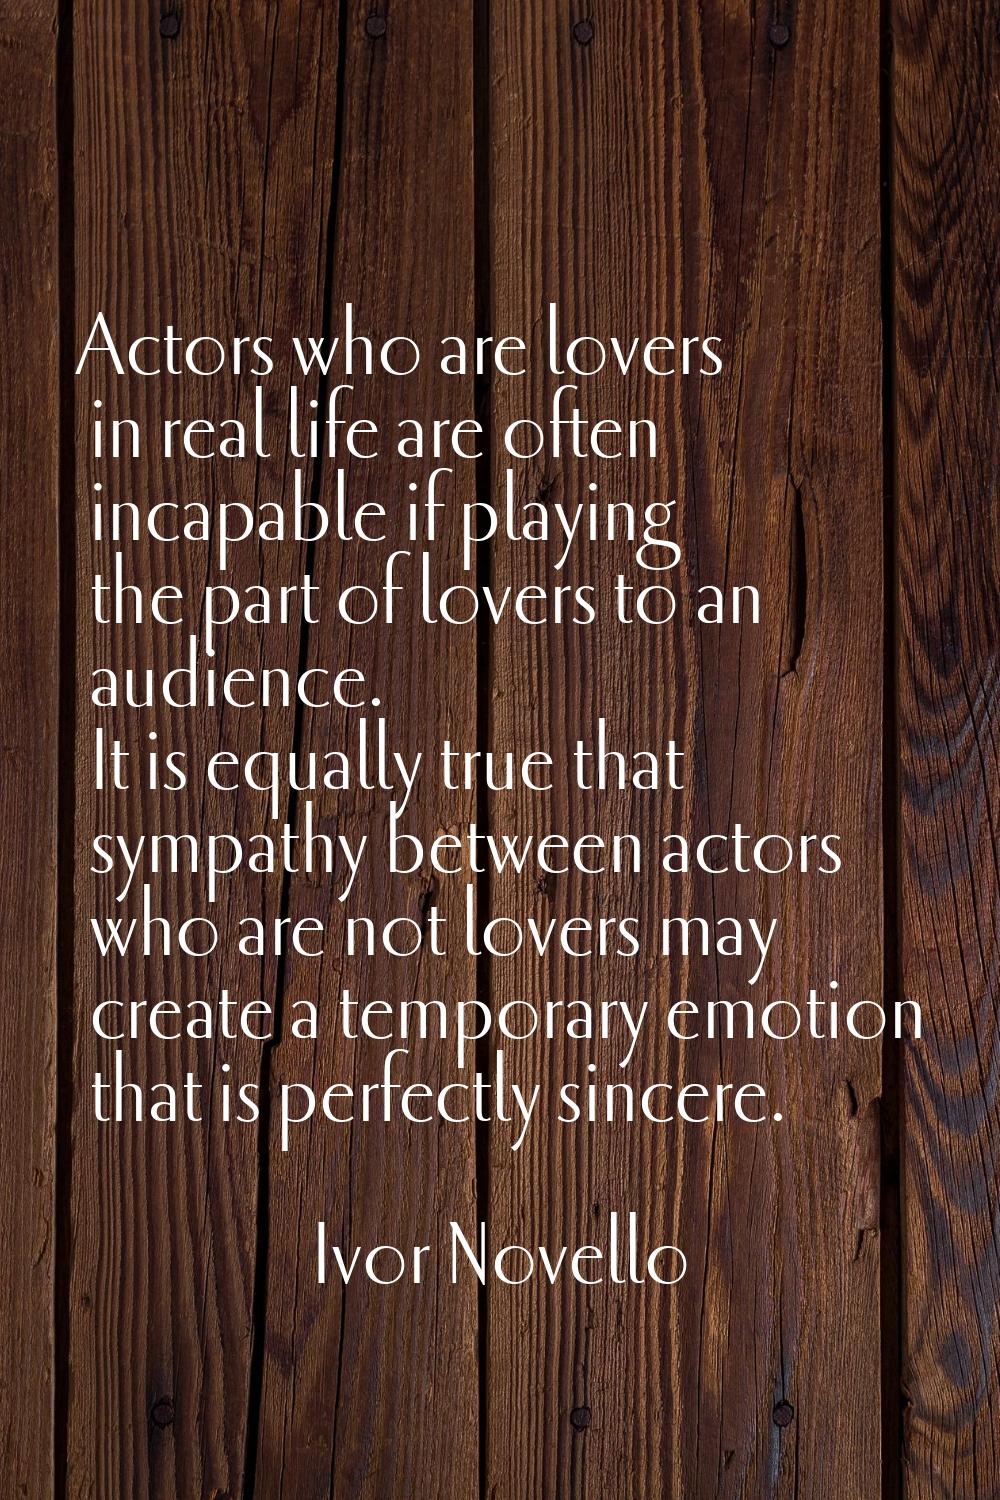 Actors who are lovers in real life are often incapable if playing the part of lovers to an audience